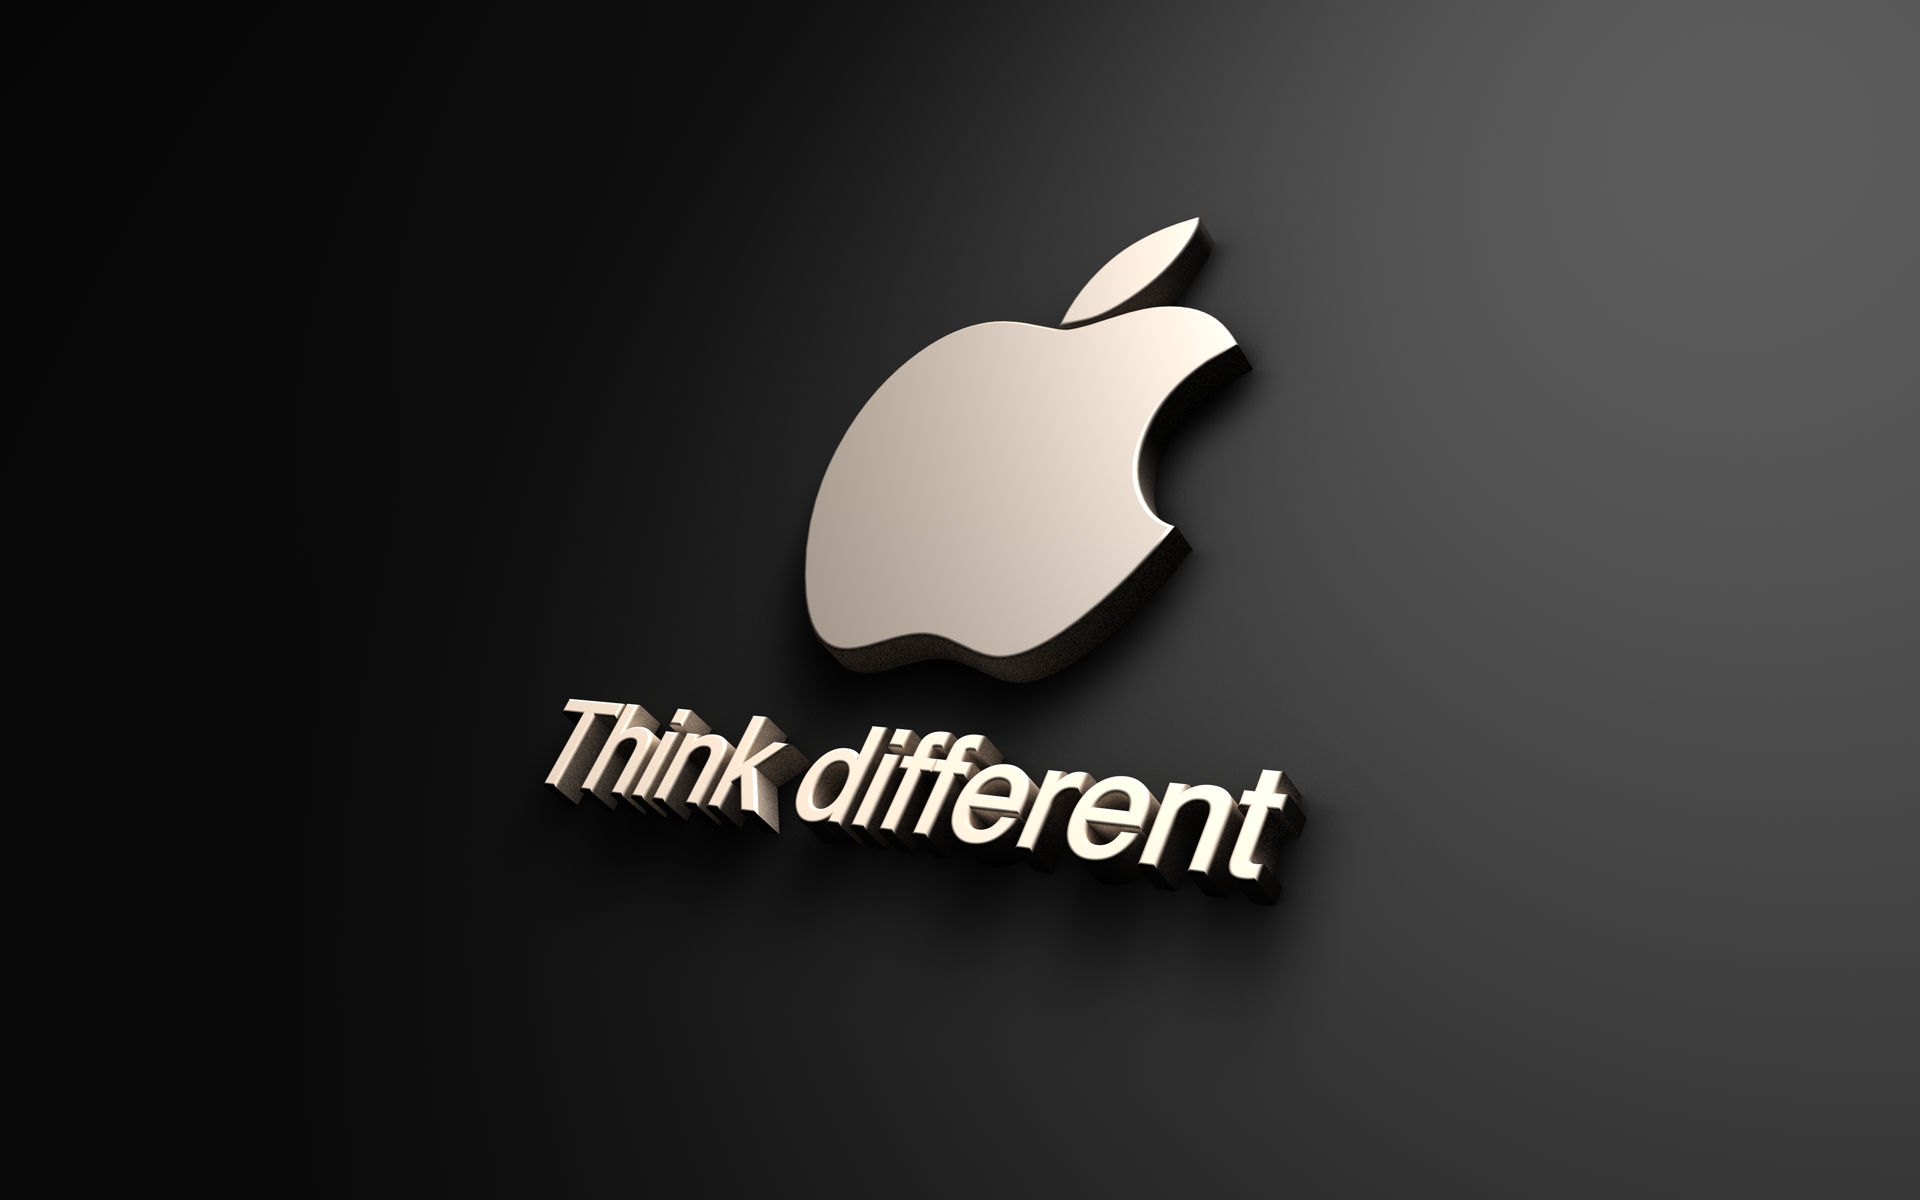  Wallpapers for Desktop Think Different Apple Wallpapers download 1920x1200